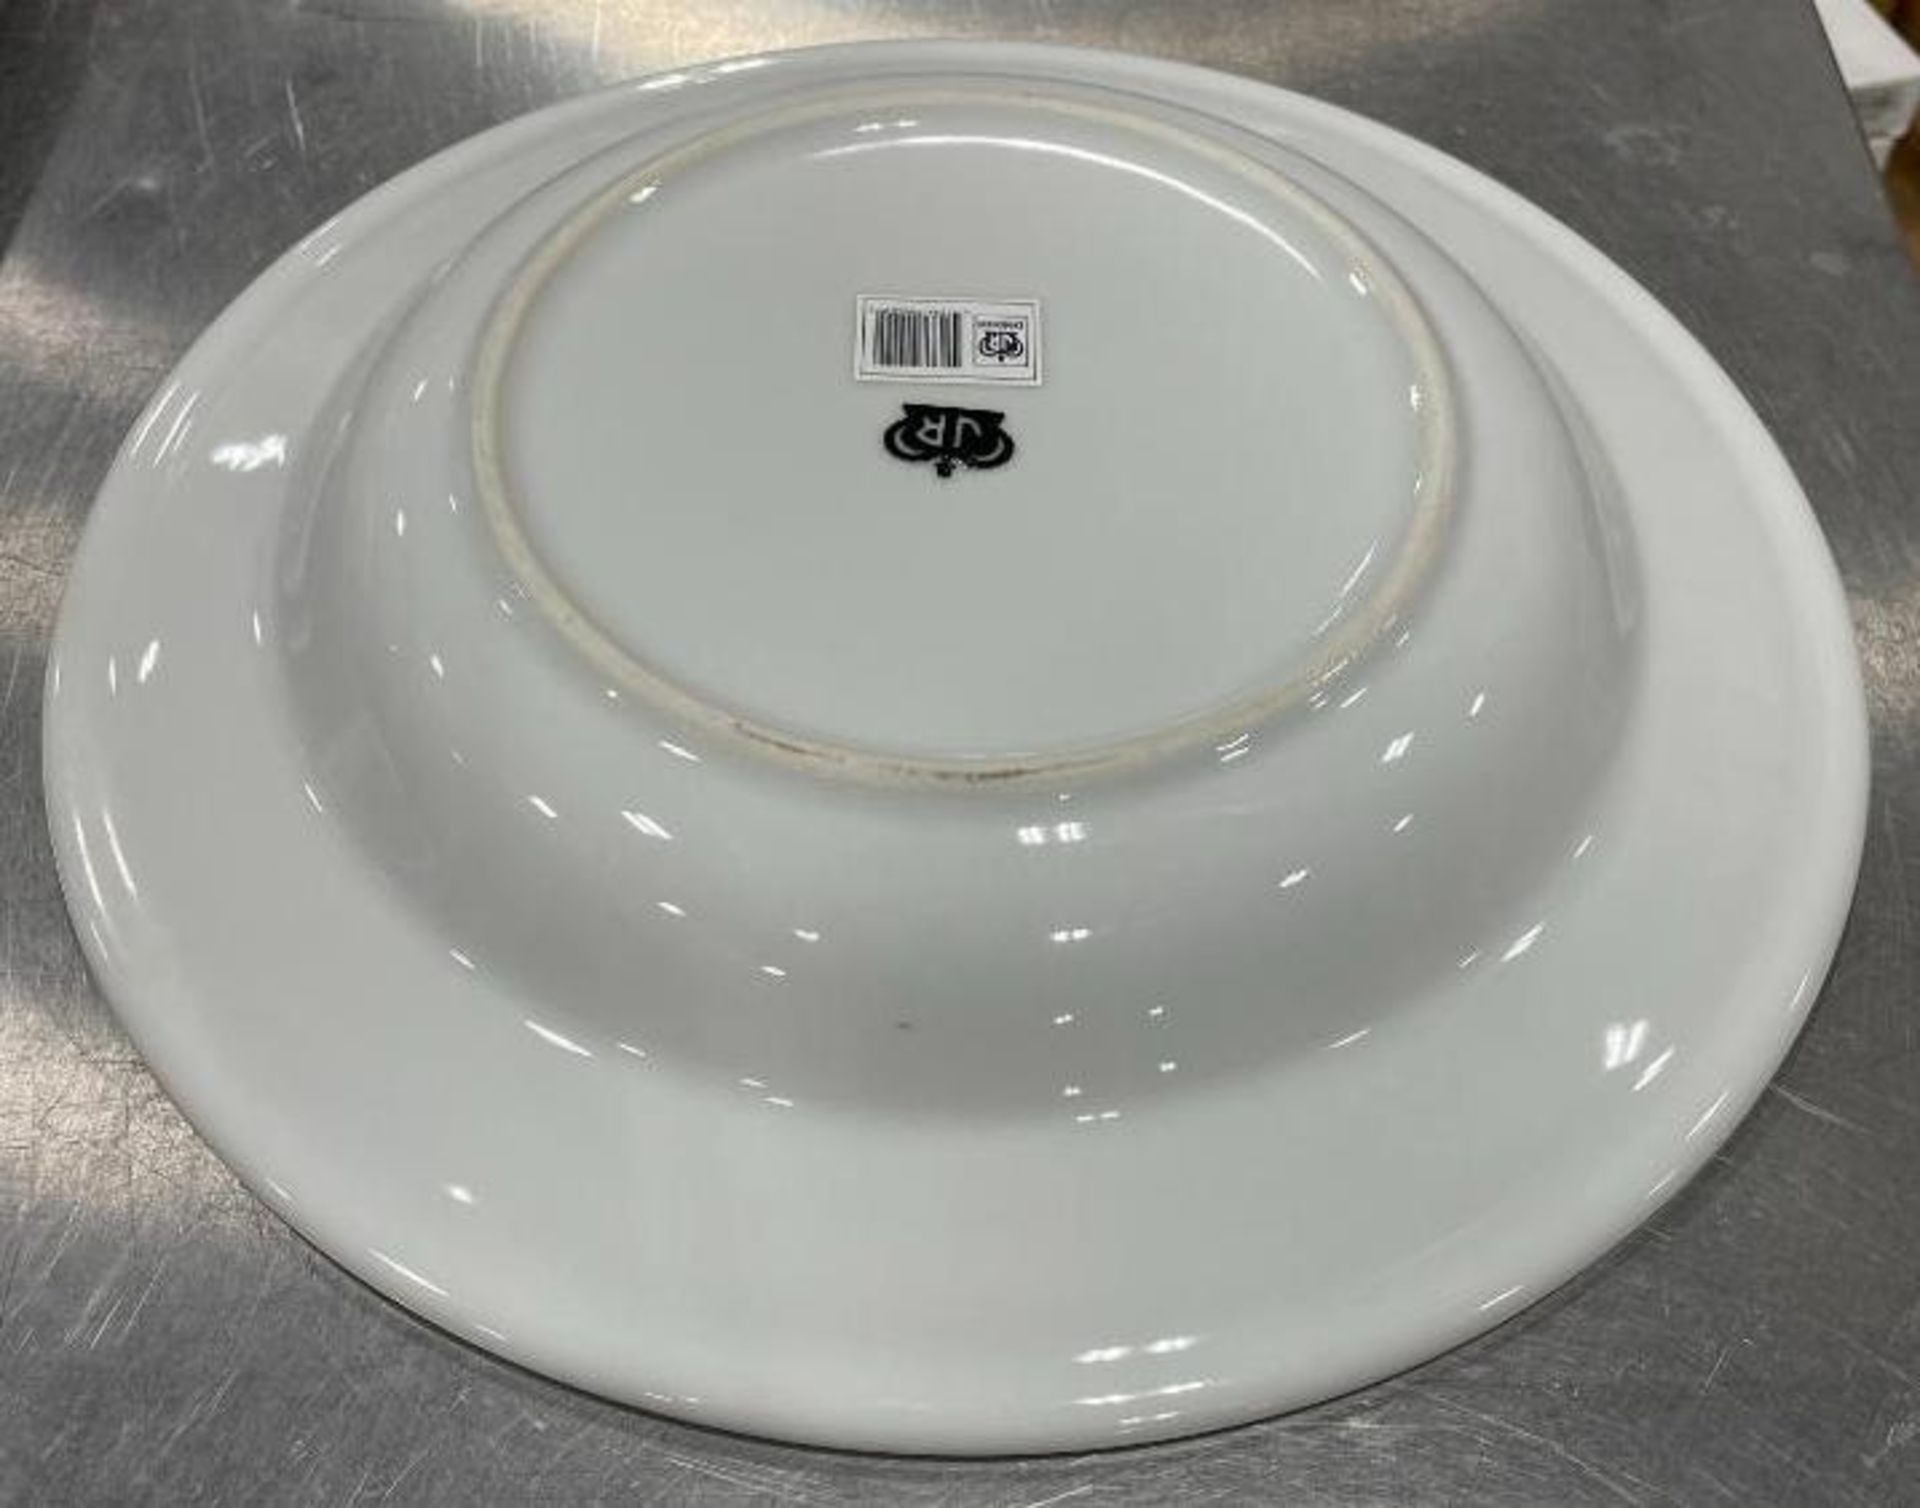 5 CASES OF 11 5/8" RIMMED PASTA / SOUP DISHES, JOHNSON ROSE 90009, CASE OF 12 - NEW - Image 3 of 4